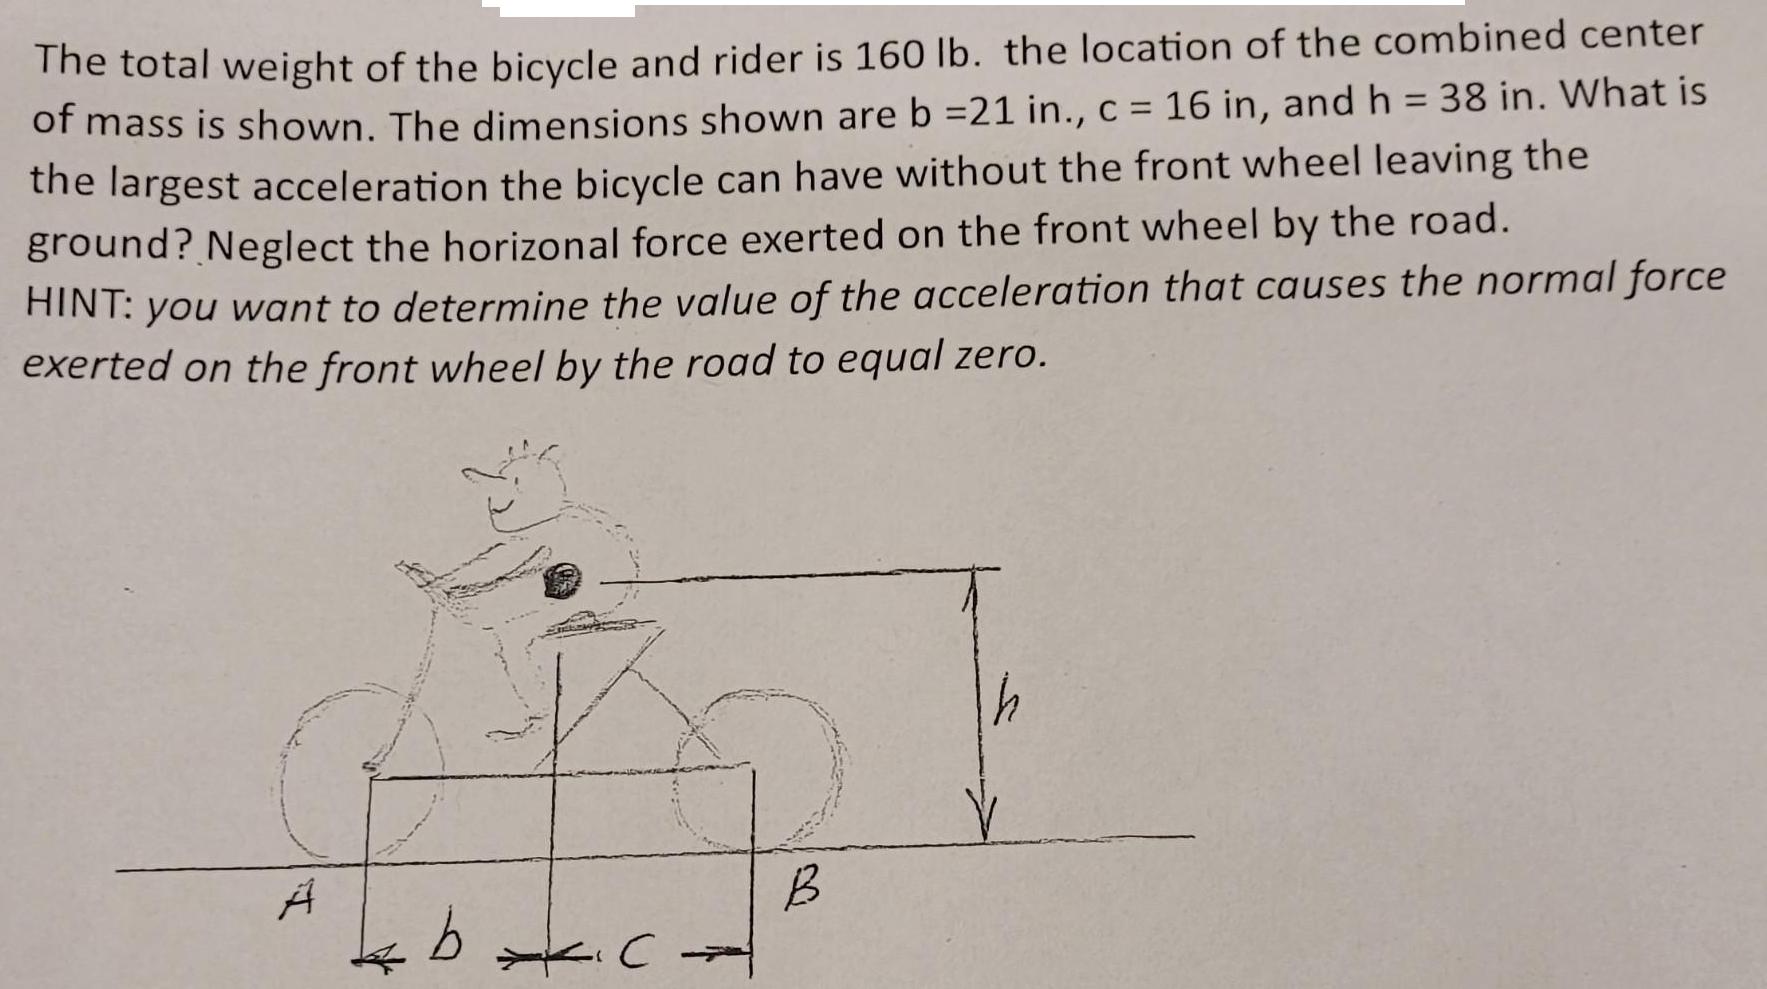 The total weight of the bicycle and rider is 160 lb. the location of the combined center of mass is shown.